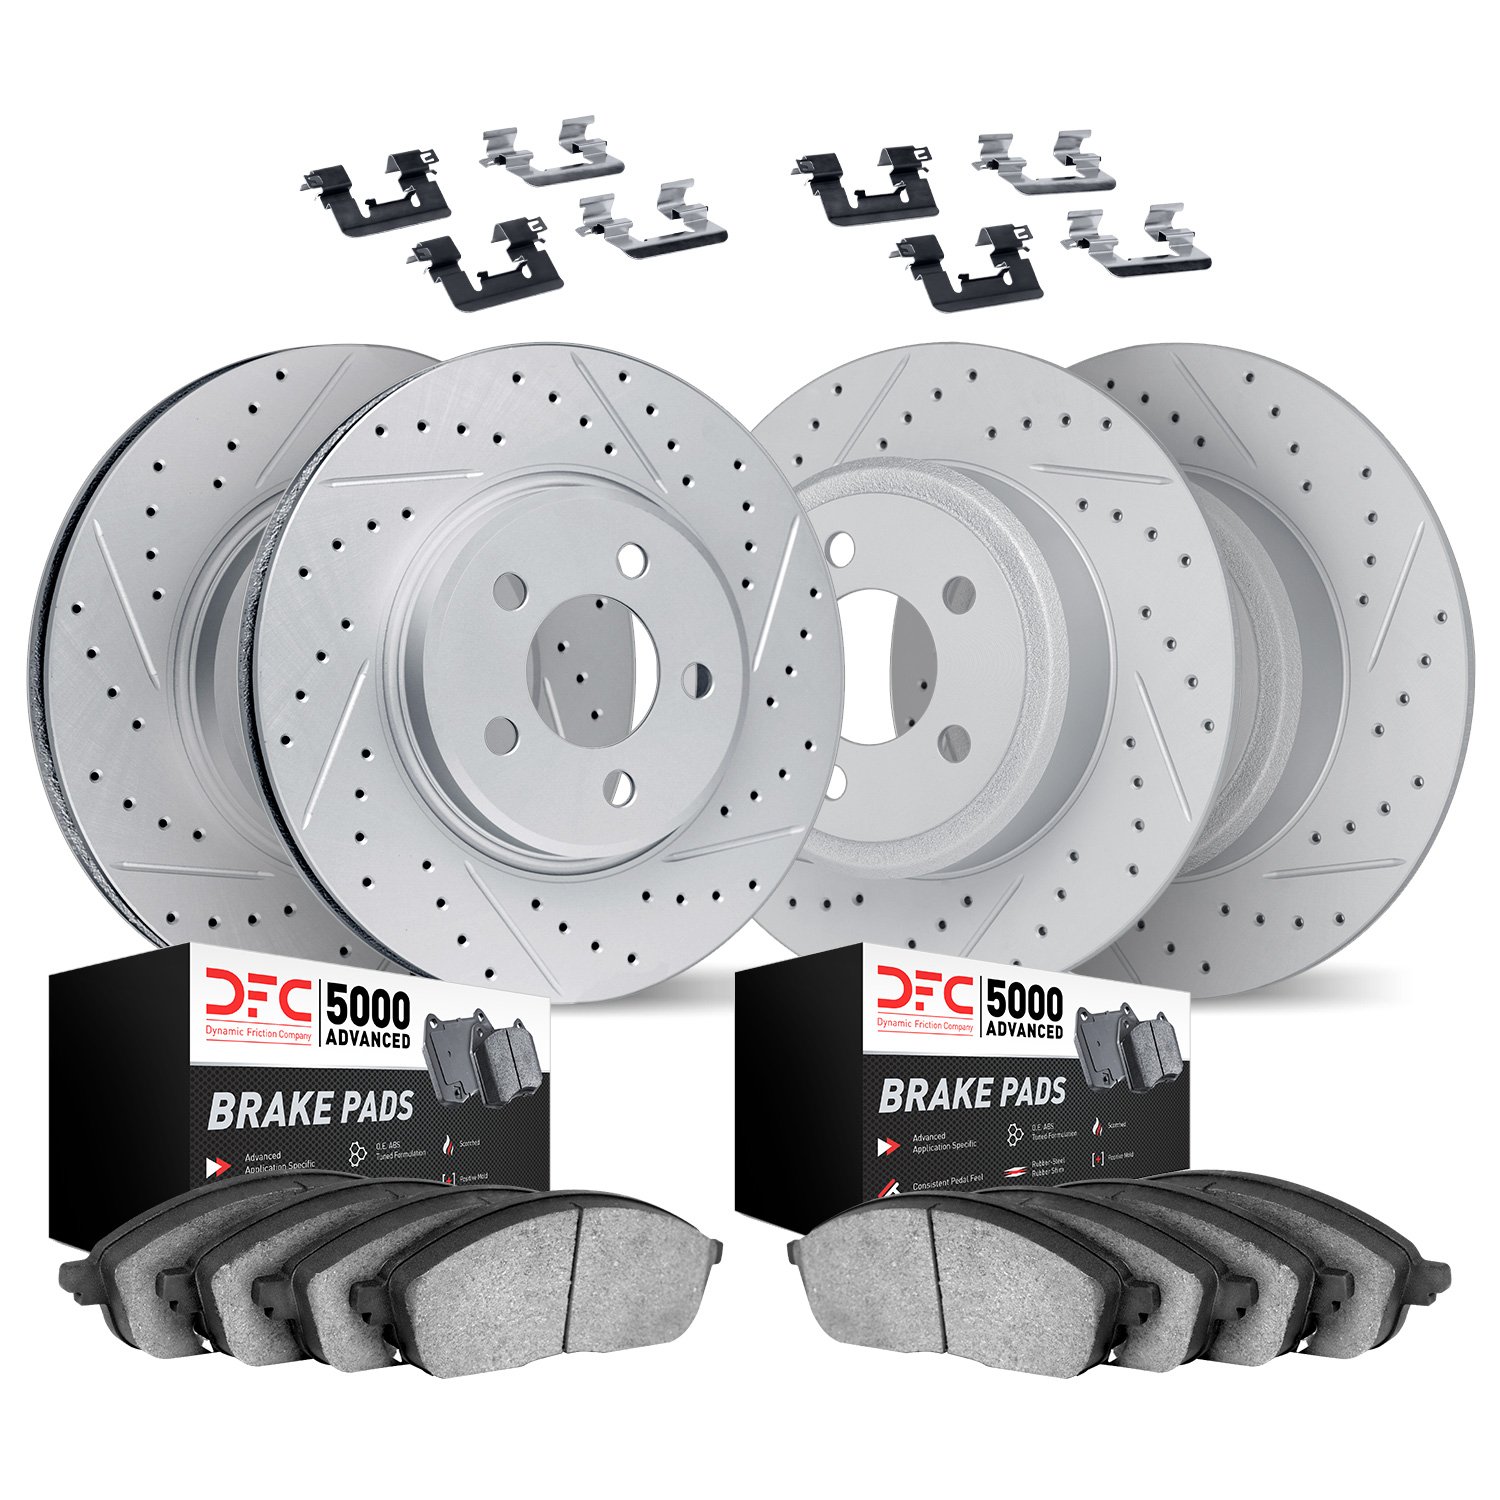 2514-39020 Geoperformance Drilled/Slotted Rotors w/5000 Advanced Brake Pads Kit & Hardware, 2004-2008 Mopar, Position: Front and